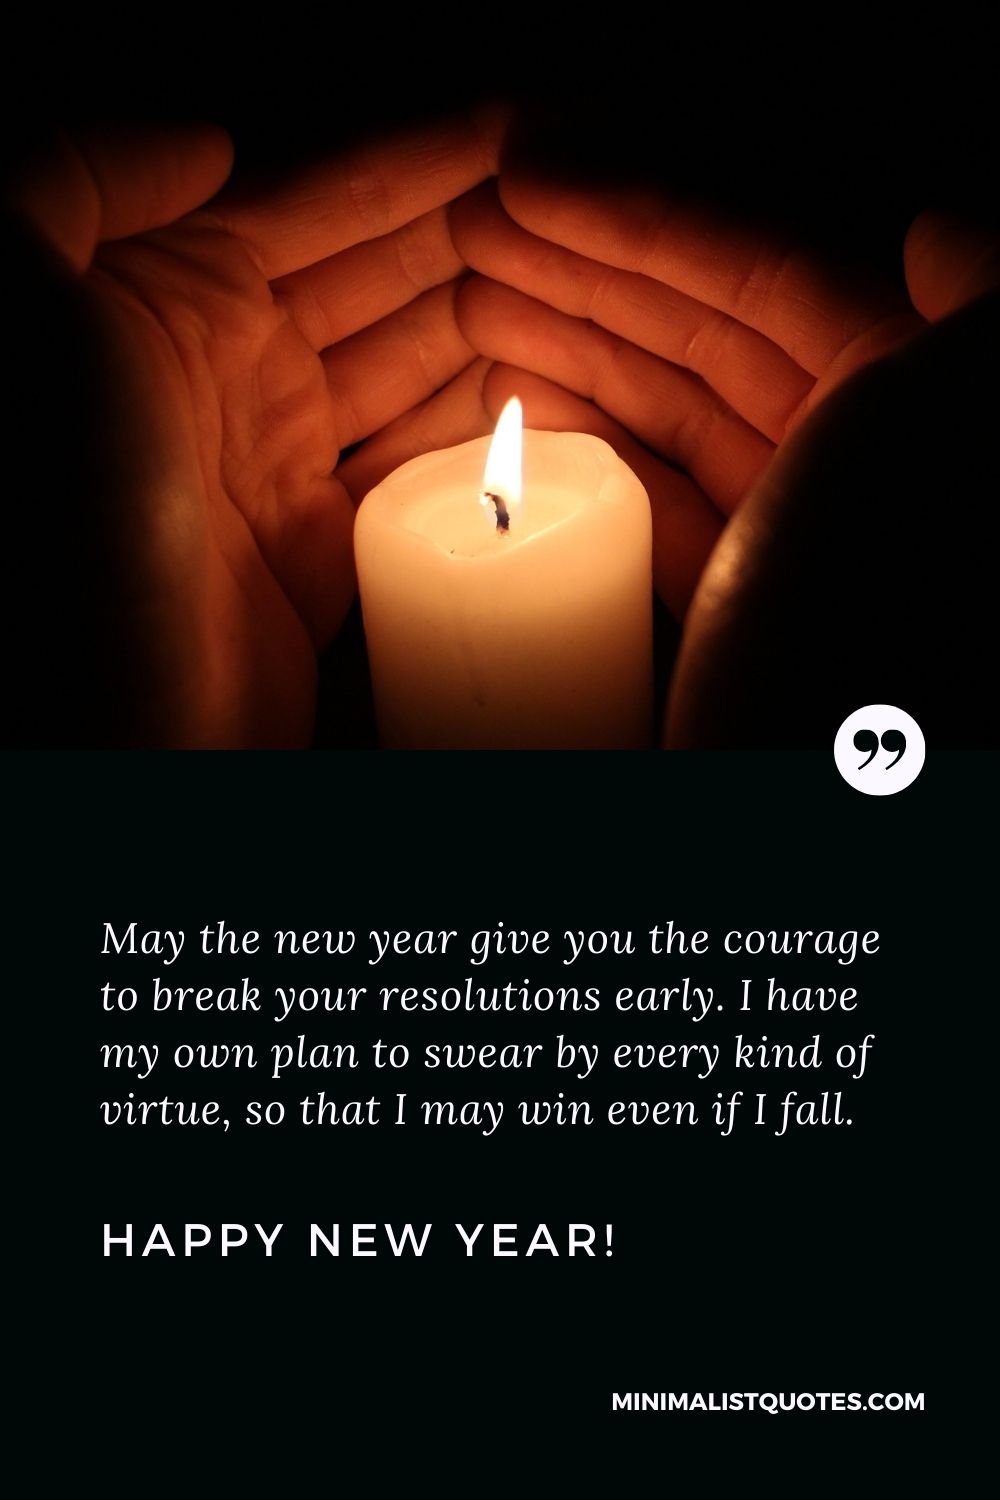 May the new year give you the courage to break your resolutions early. I have my own plan to swear by every kind of virtue, so that I may win even if I fall. Happy New Year!